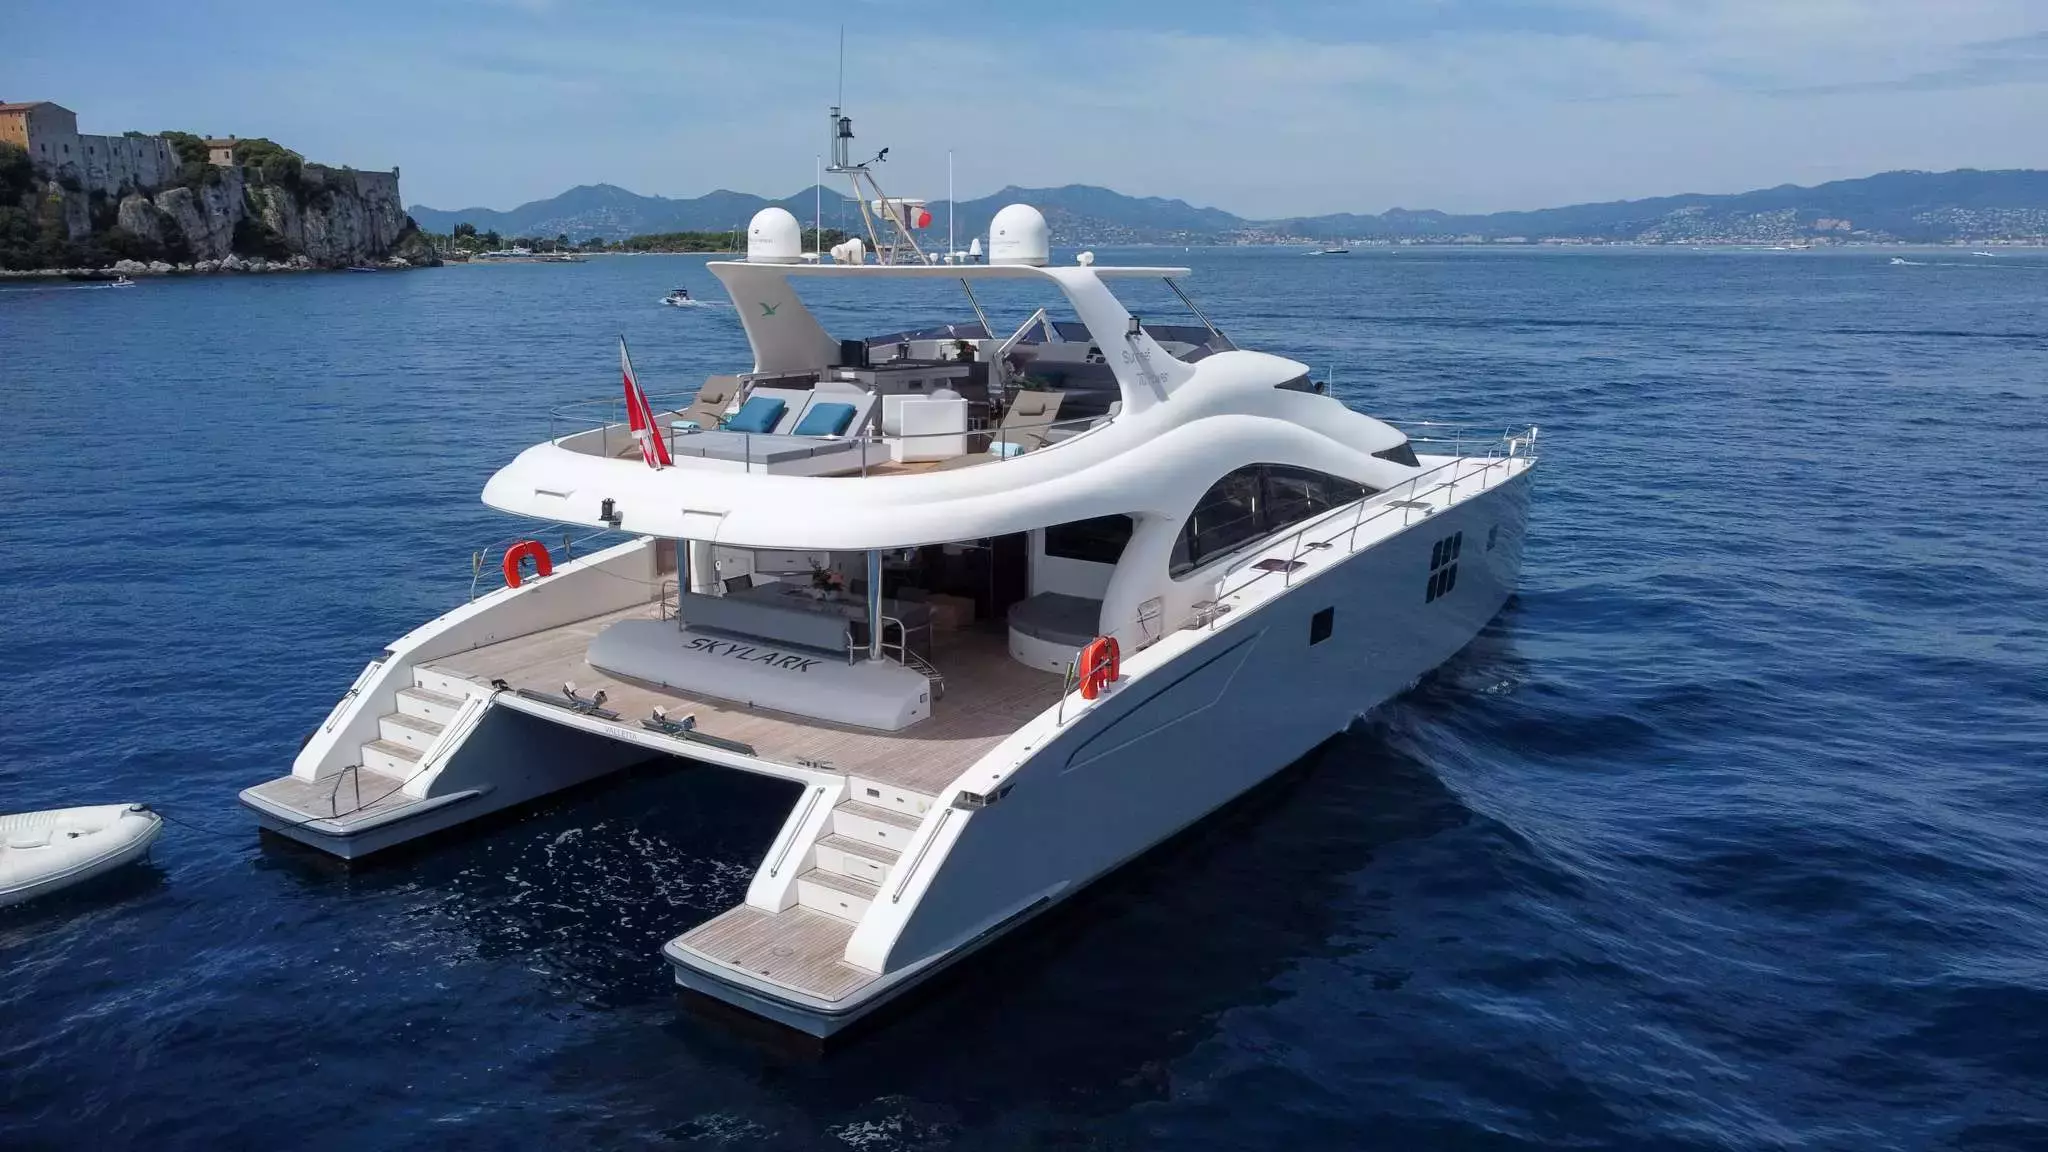 Skylark by Sunreef Yachts - Top rates for a Rental of a private Power Catamaran in Spain